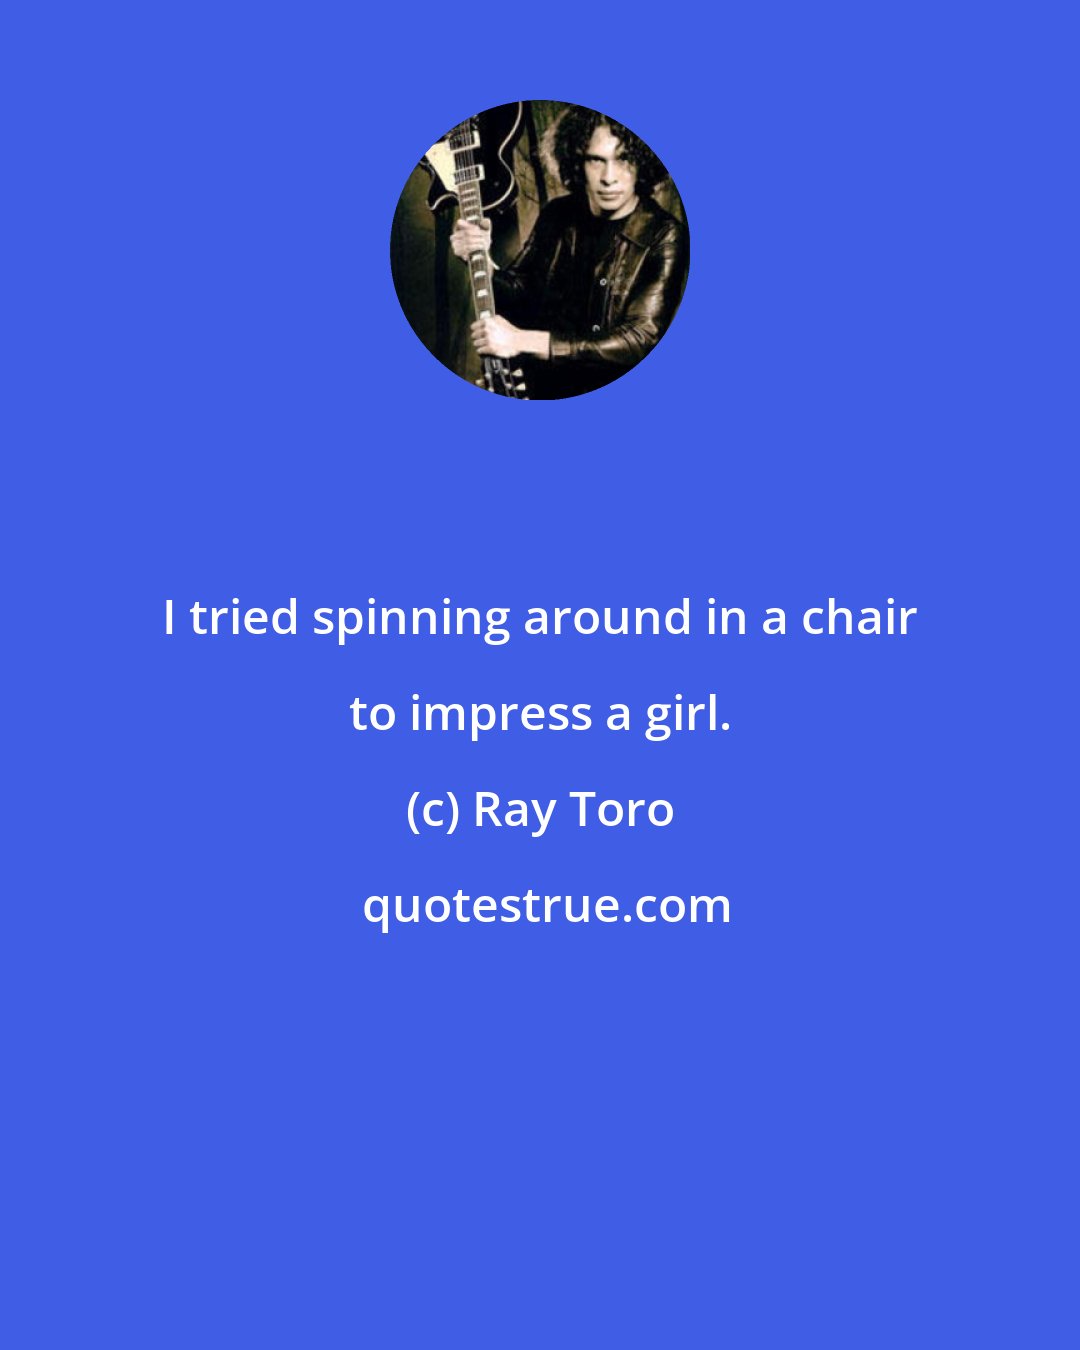 Ray Toro: I tried spinning around in a chair to impress a girl.